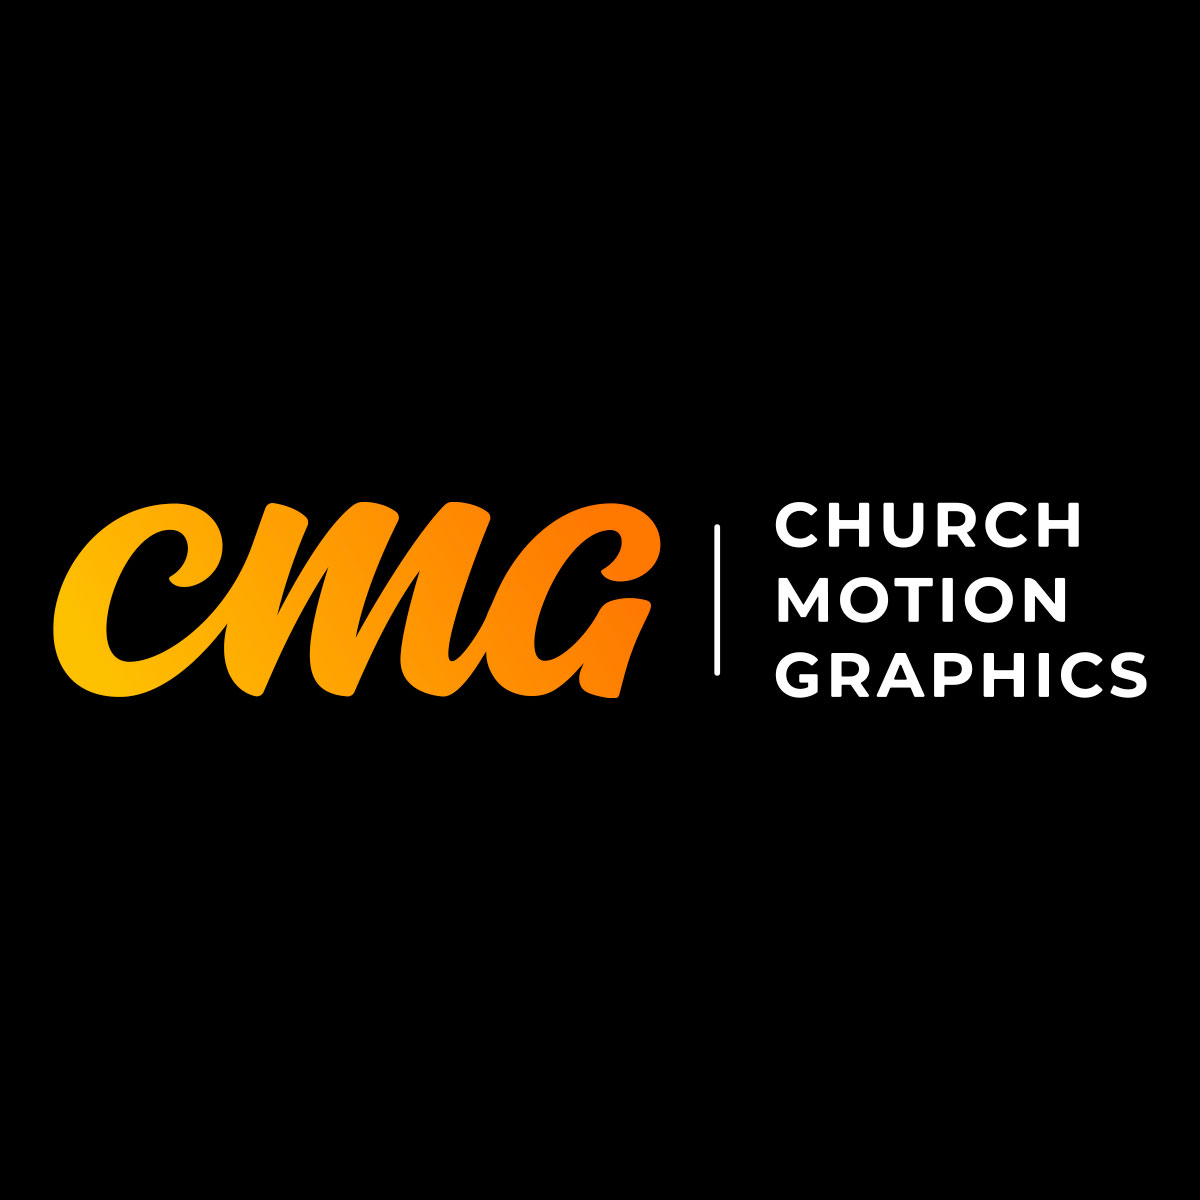 what are motion graphics